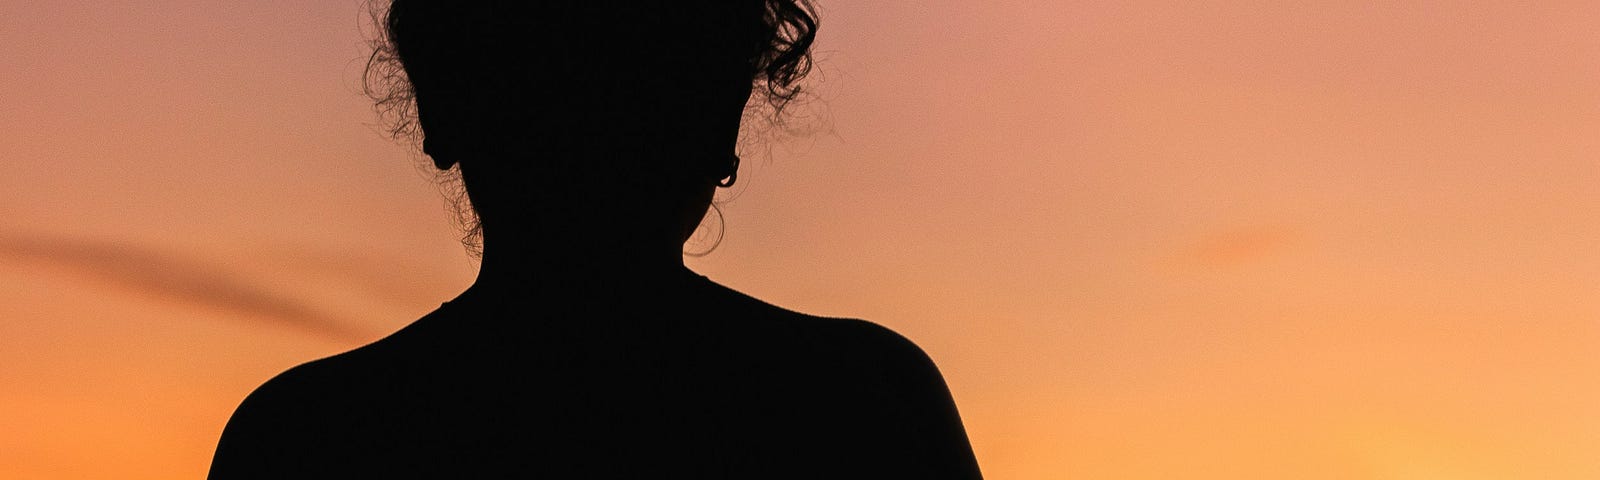 A woman silhouetted against an orange sky